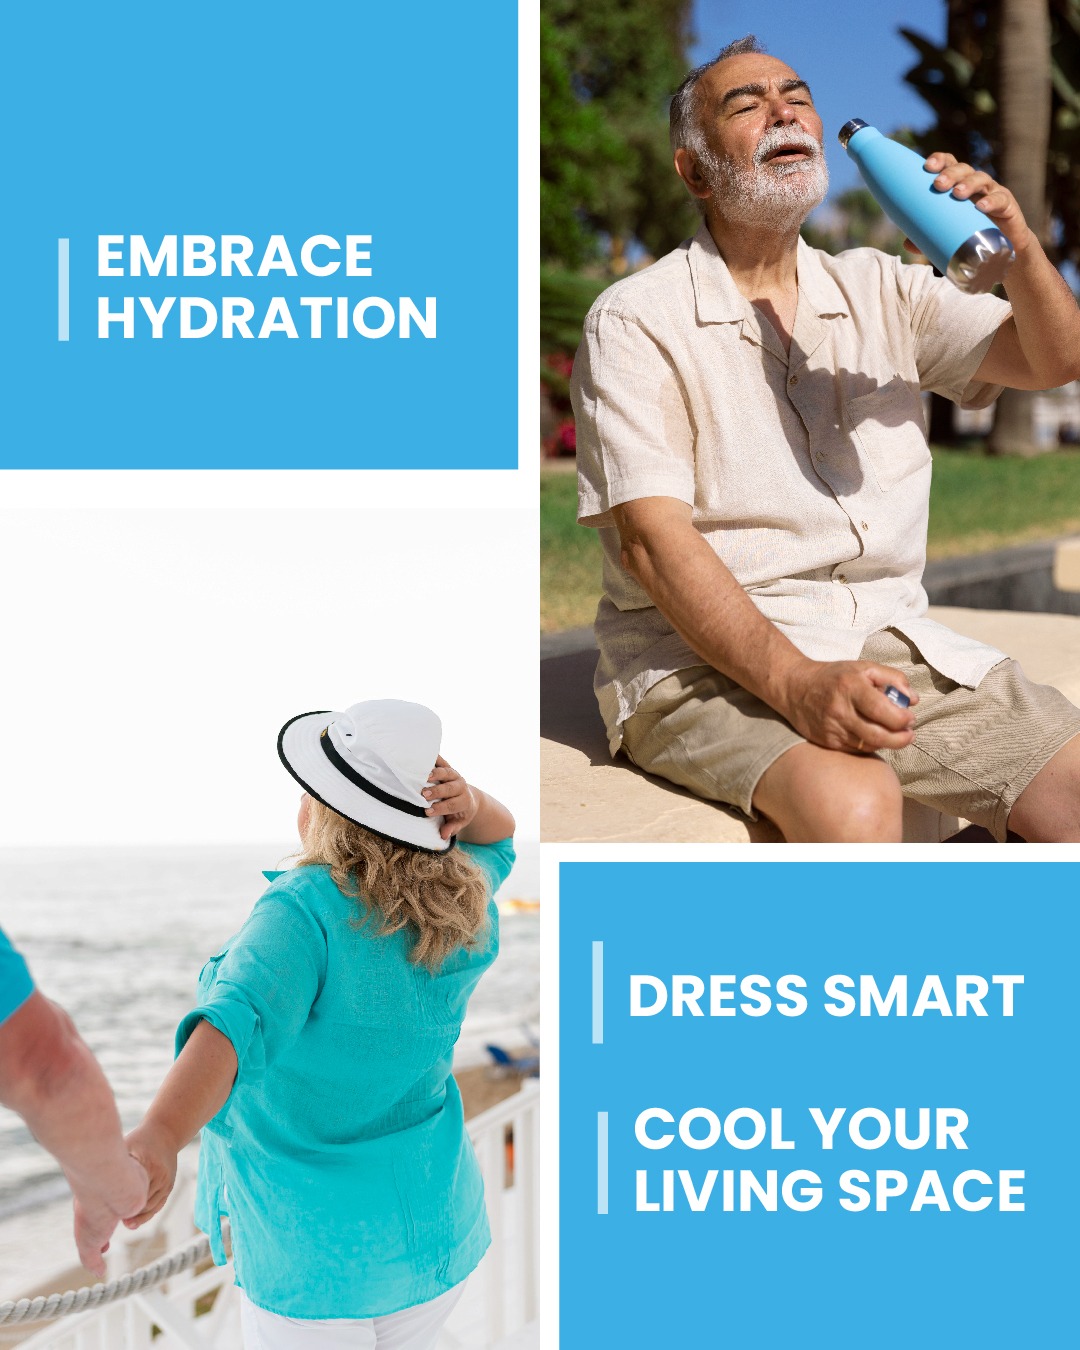 Quadrant image featuring 'Embrace Hydration' text, an elderly man drinking water, an elderly woman in a light summer dress, and 'Dress Smart, Cool Your Living Space' text